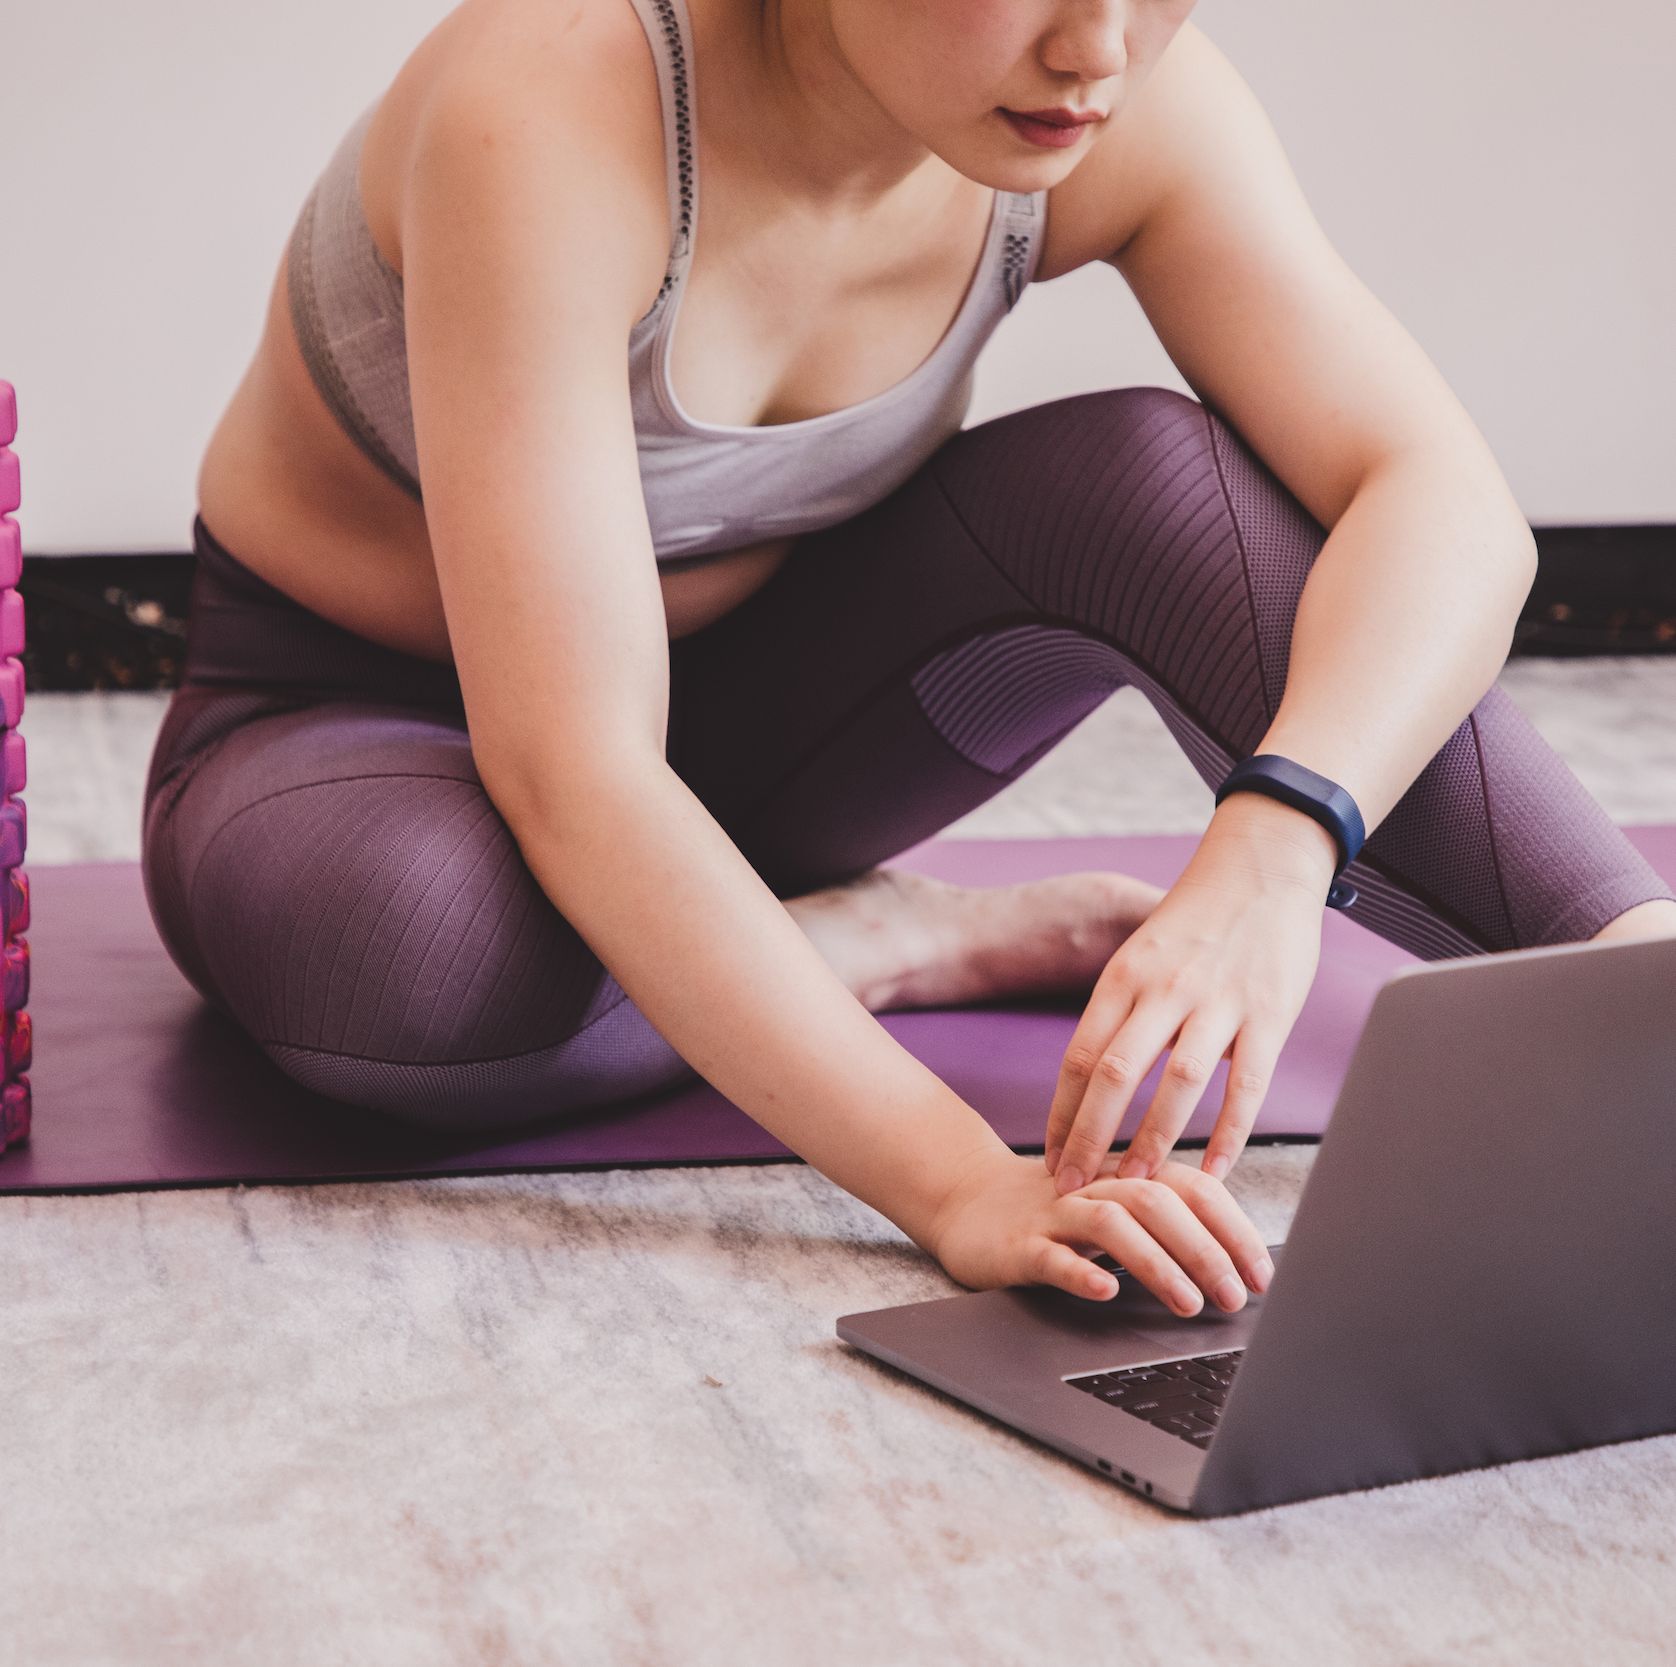 online personal training sessions review before and after results picture shows a woman sat on a yoga mat, looking at her laptop